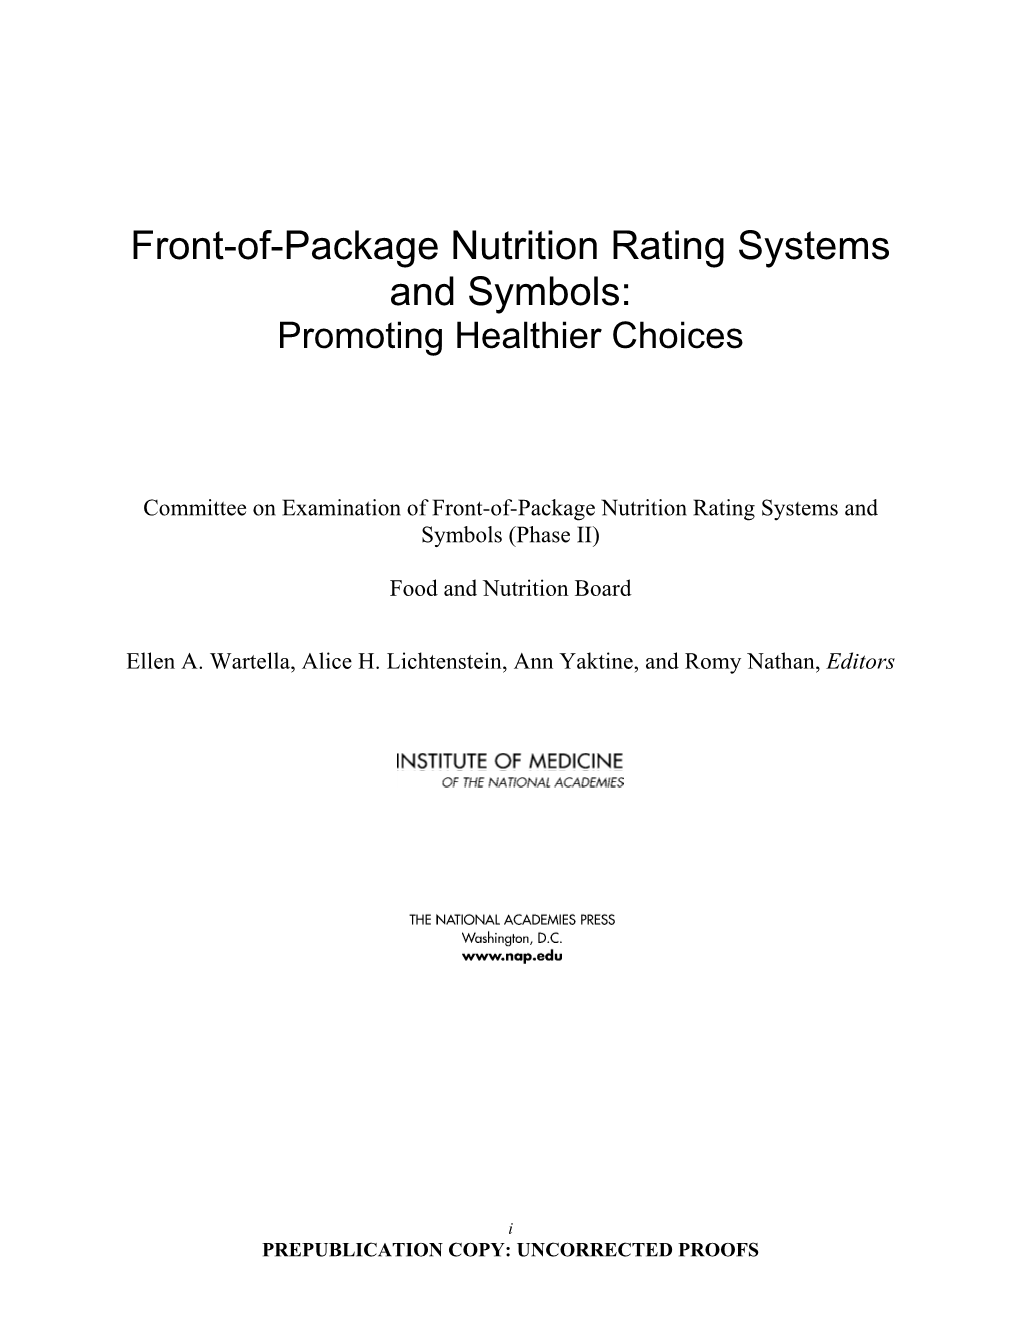 Front-Of-Package Nutrition Rating Systems and Symbols: Promoting Healthier Choices